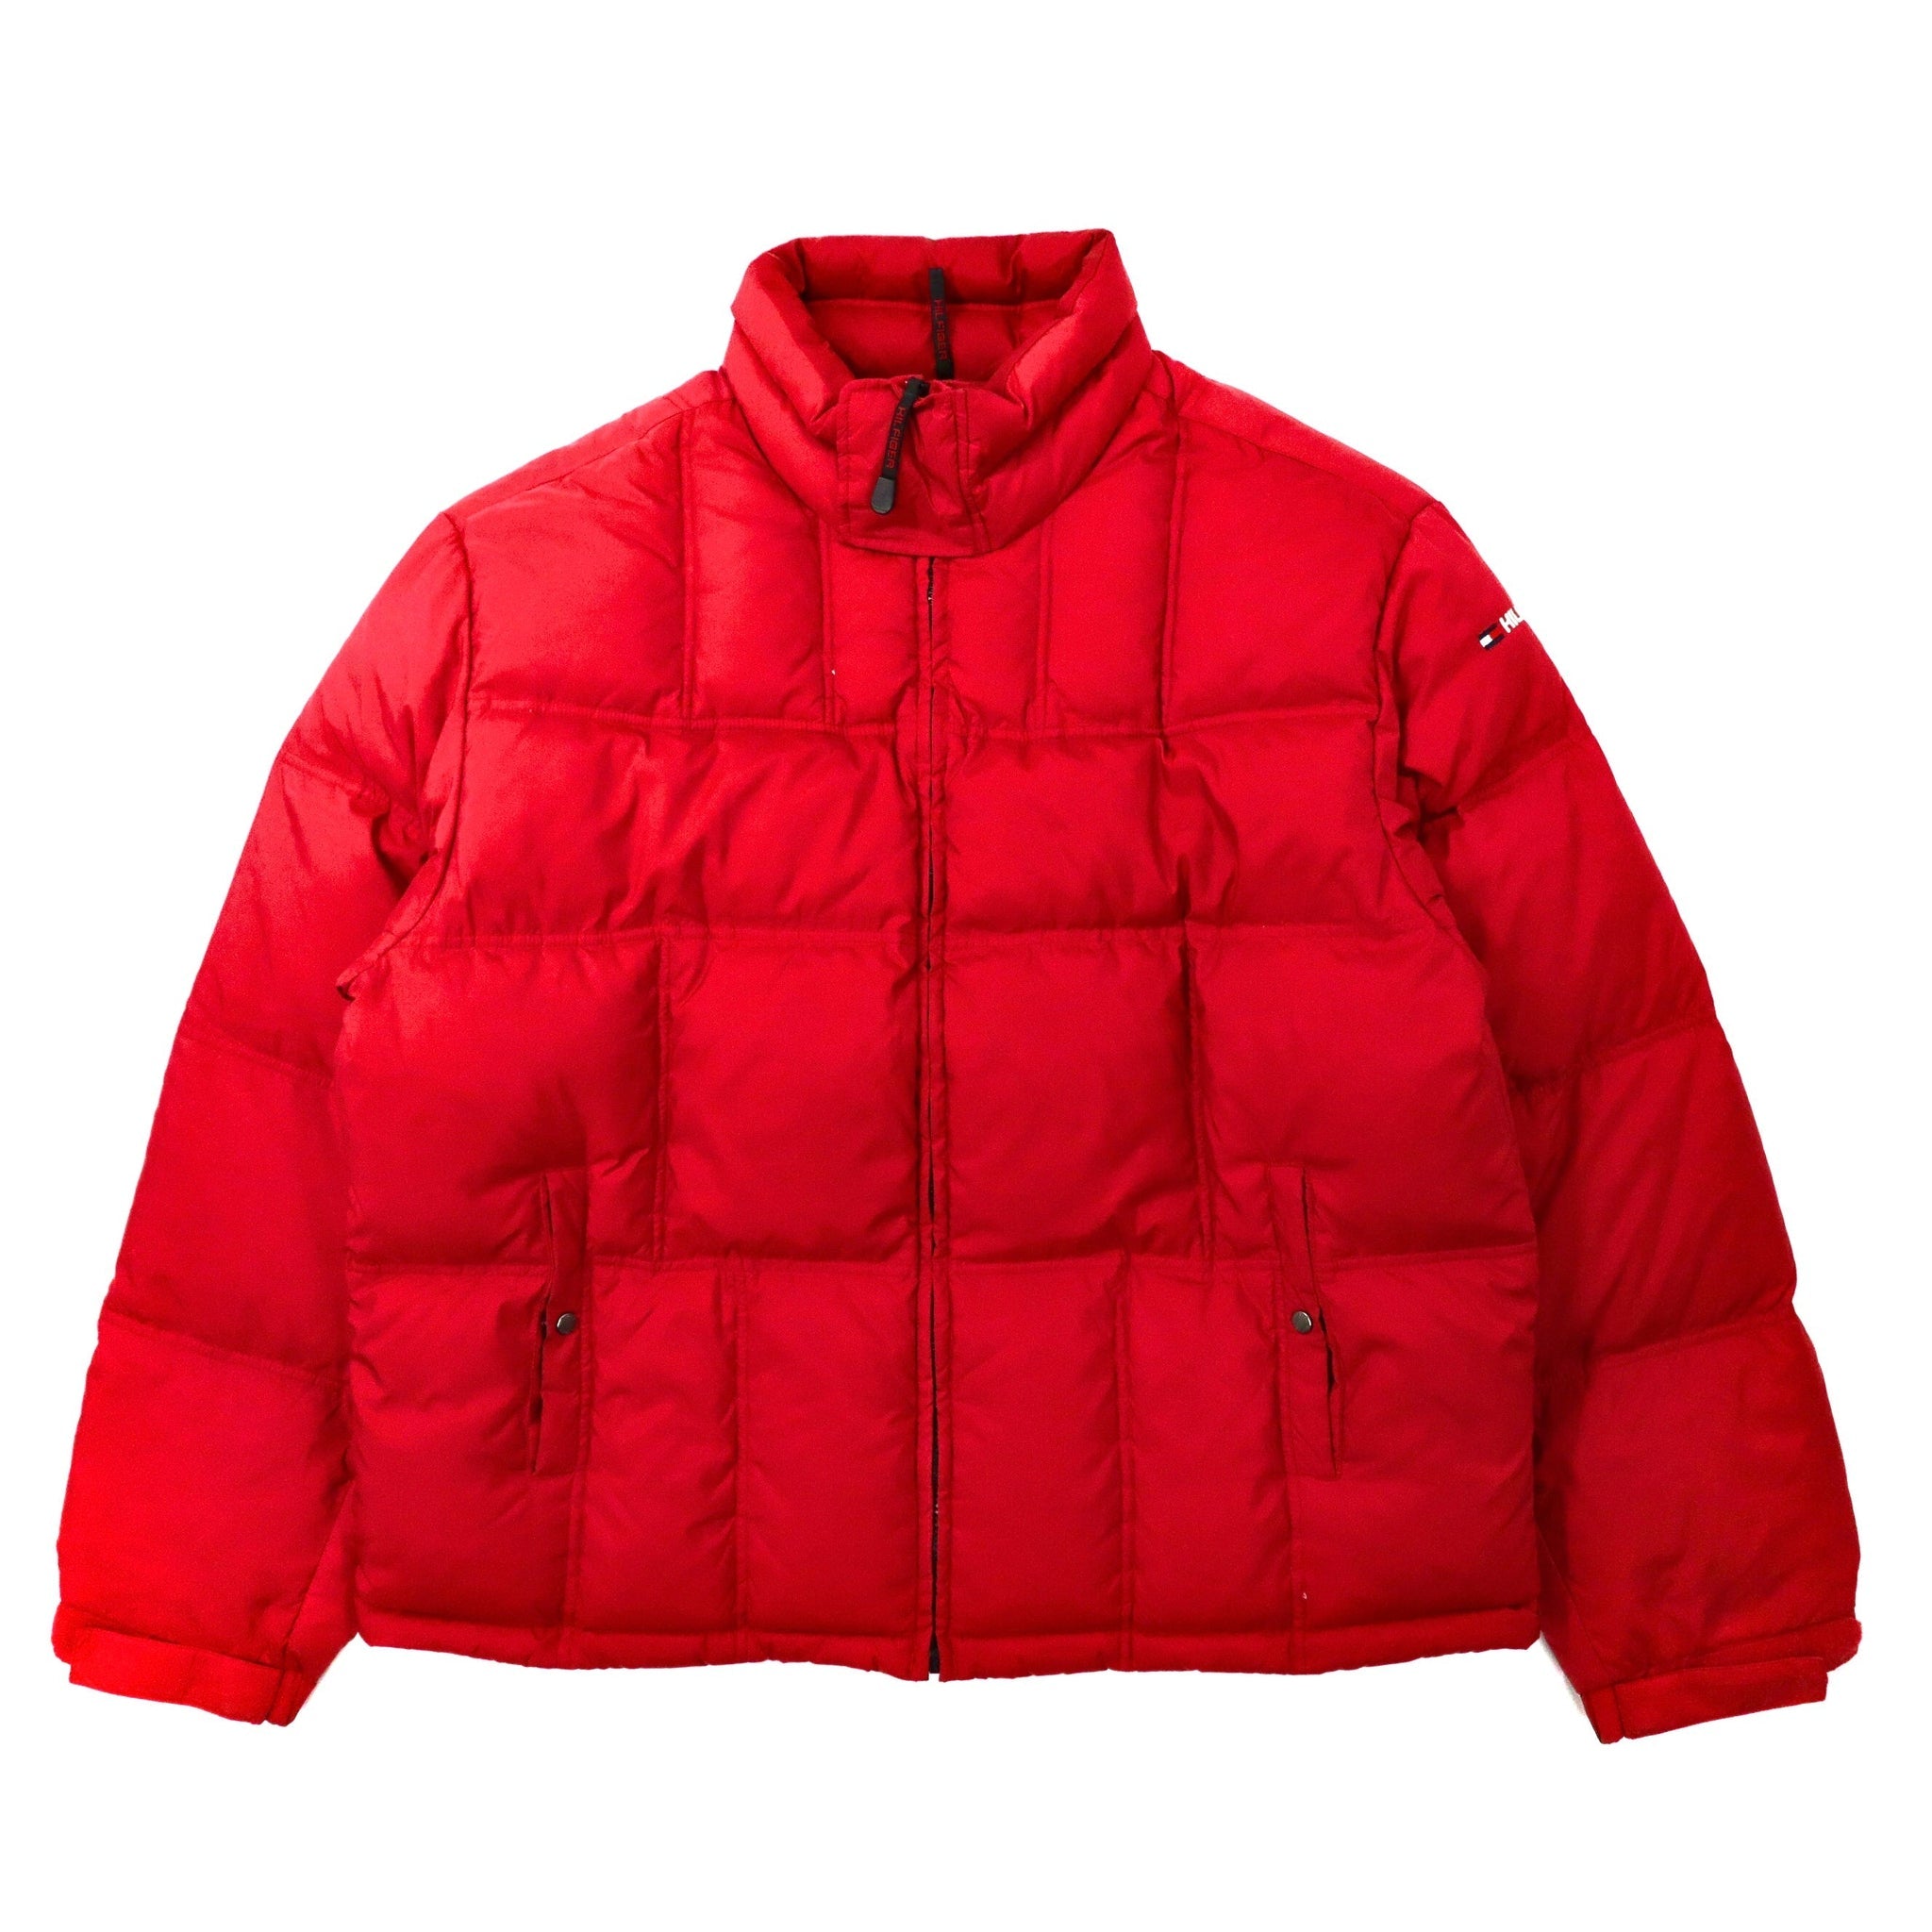 TOMMY HILFIGER PUFFER JACKET XL Red Nylon 90s – 日本然 